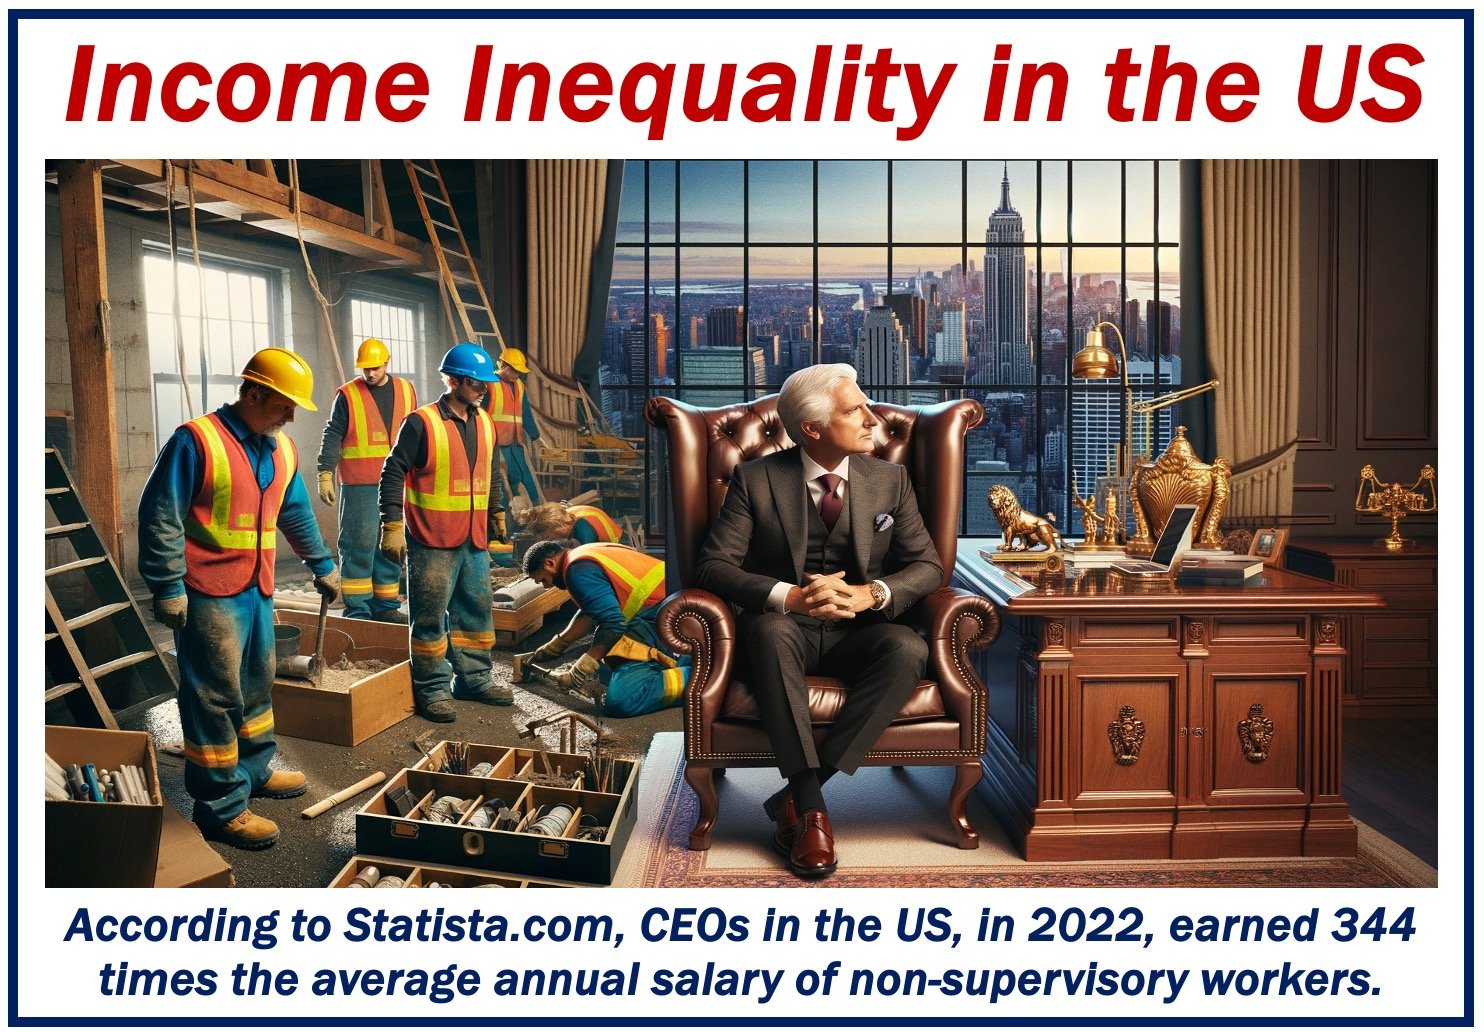 A CEO and four manual workers - depicting income inequality.